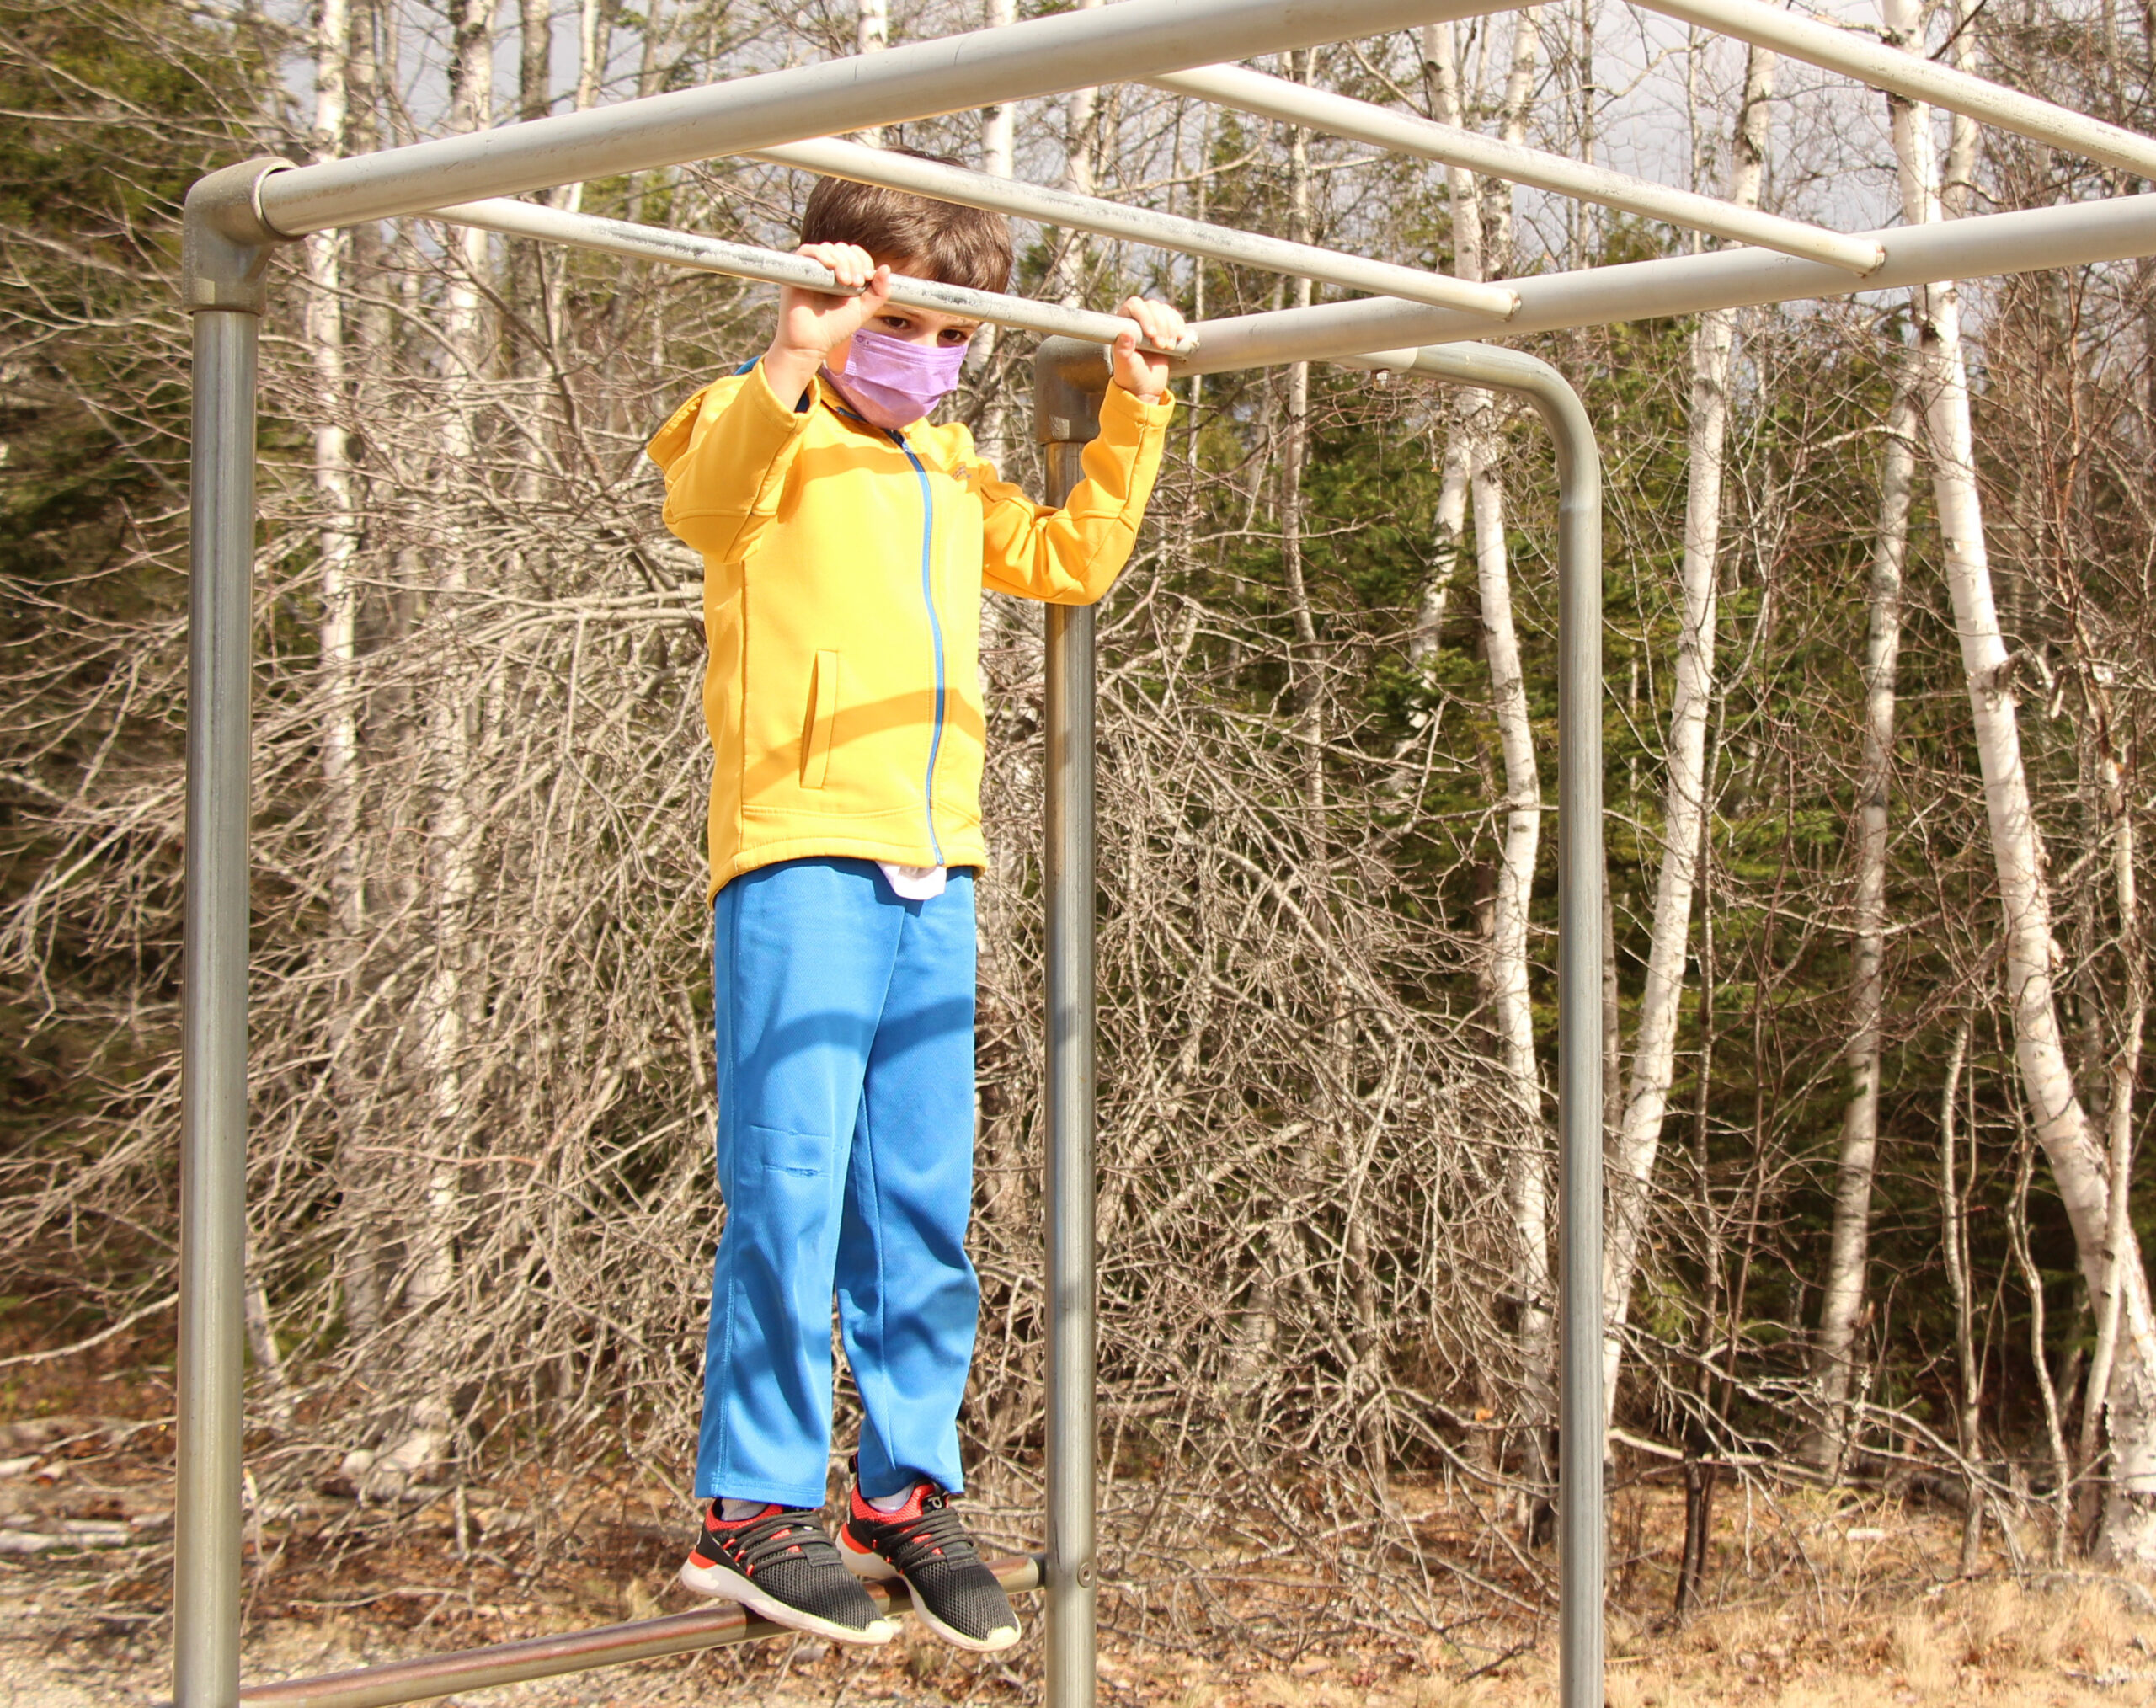 Color photo of a white child wearing a bright yellow jacket stands on monkey bars at an elementary school. Trees are in the background and it is spring.